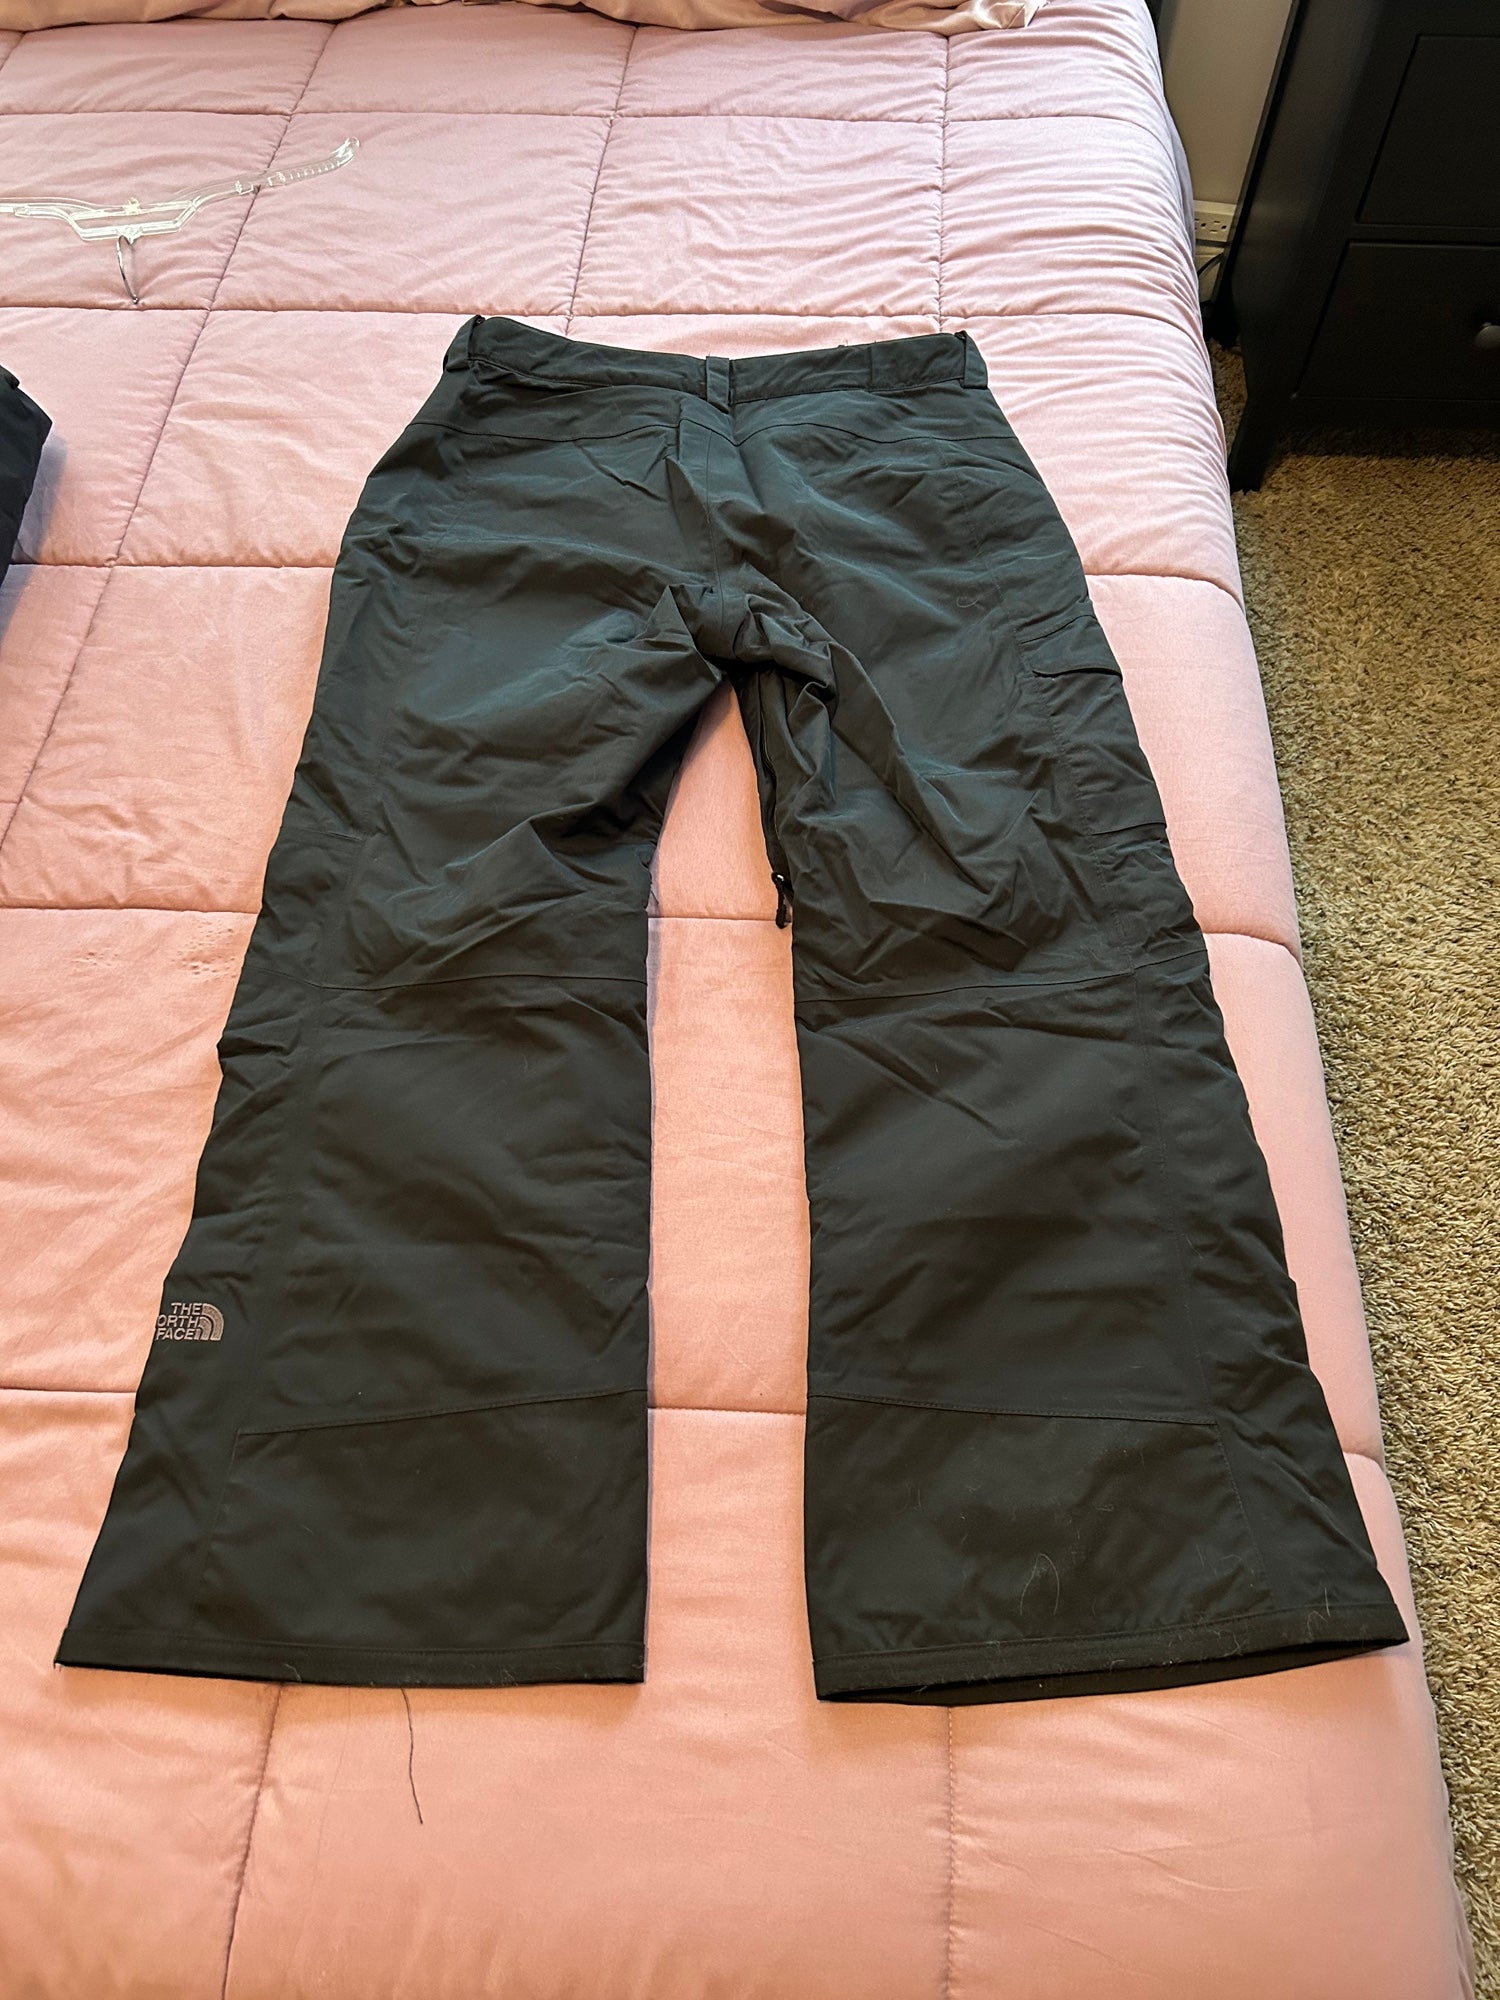 THE NORTH FACE - HYVENT - Womens Ski Pants, Women's Fashion